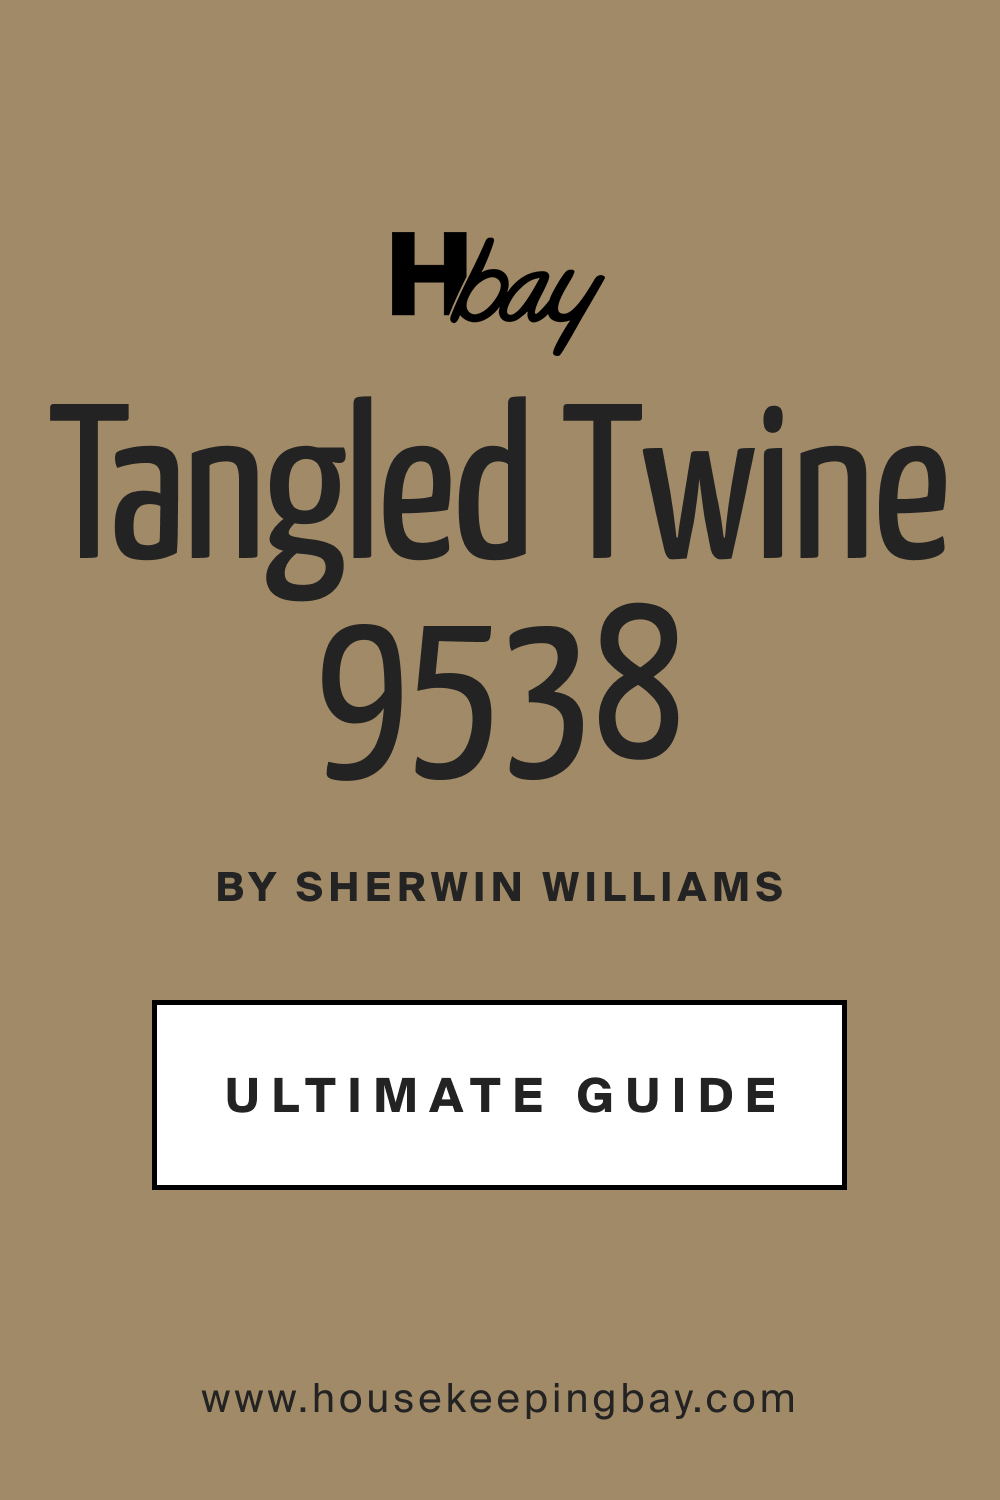 SW 9538 Tangled Twine by Sherwin Williams Ultimate Guide